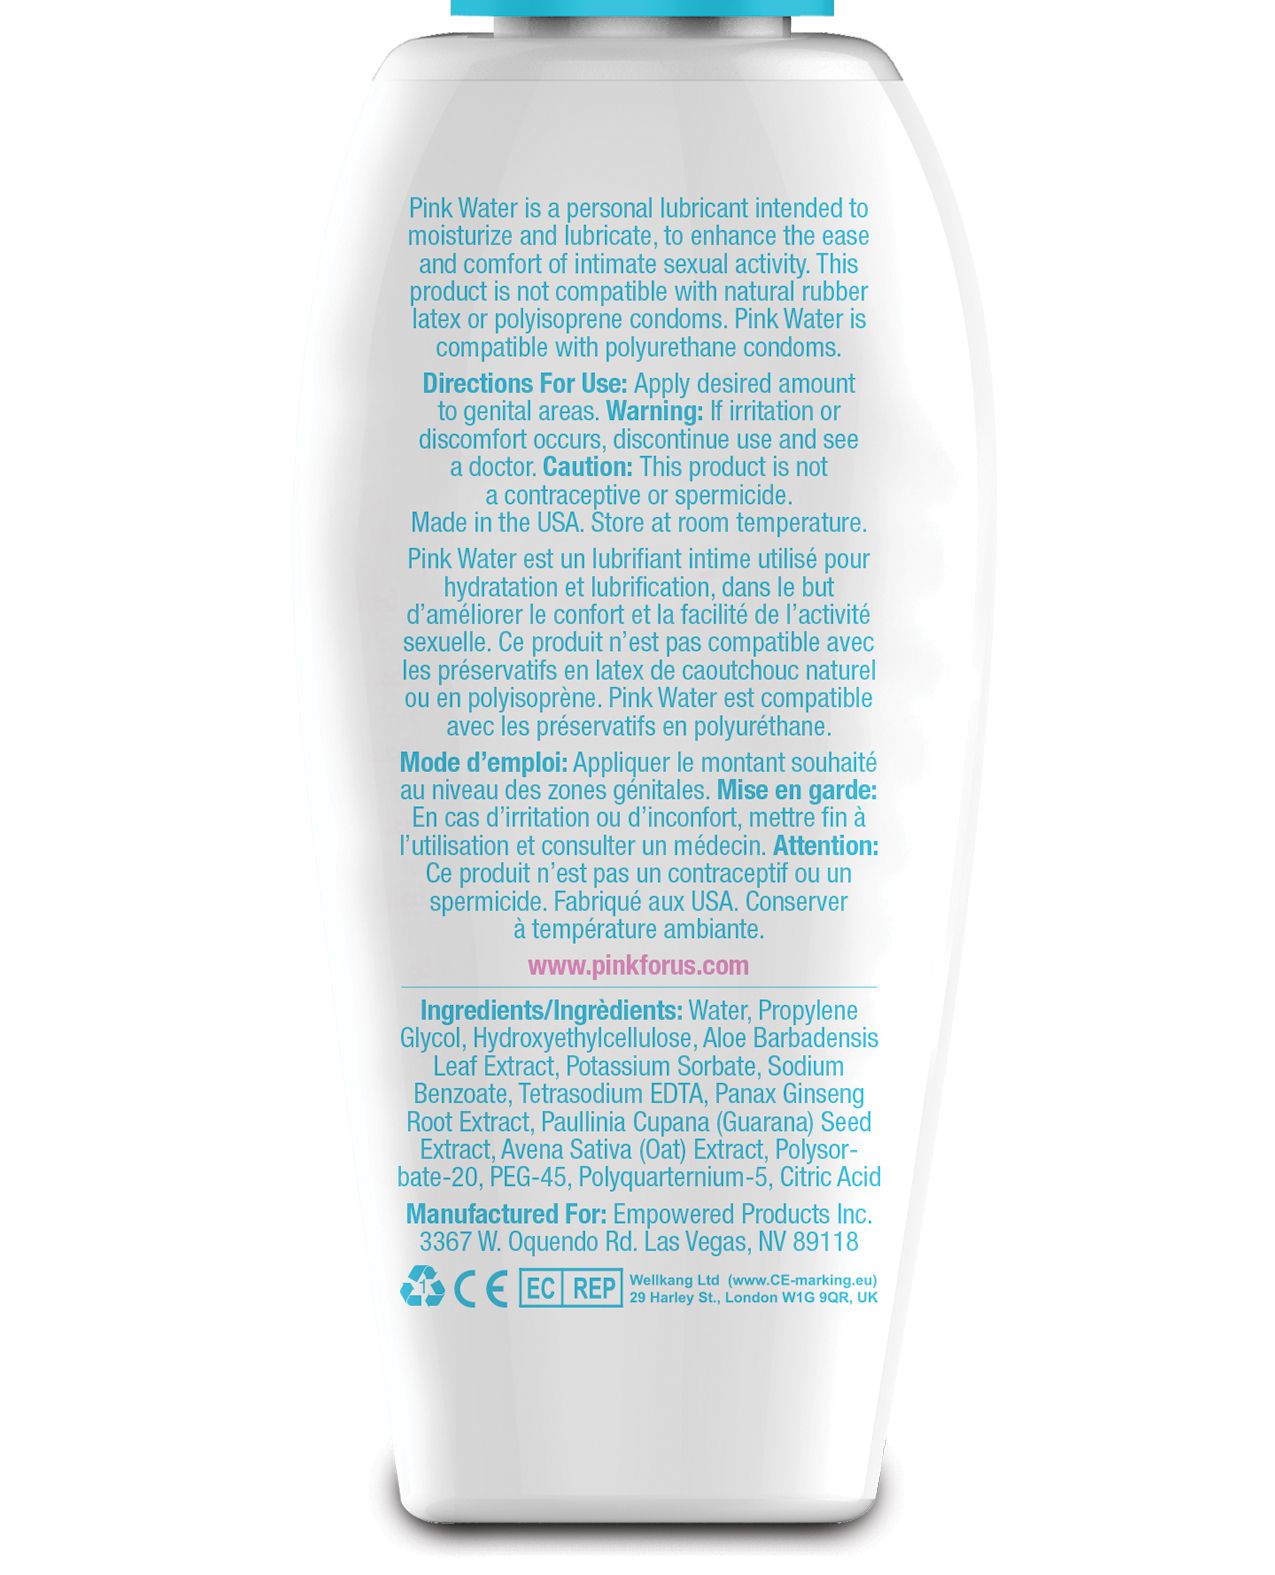 Photo shows the back of the bottle of Pink Water.